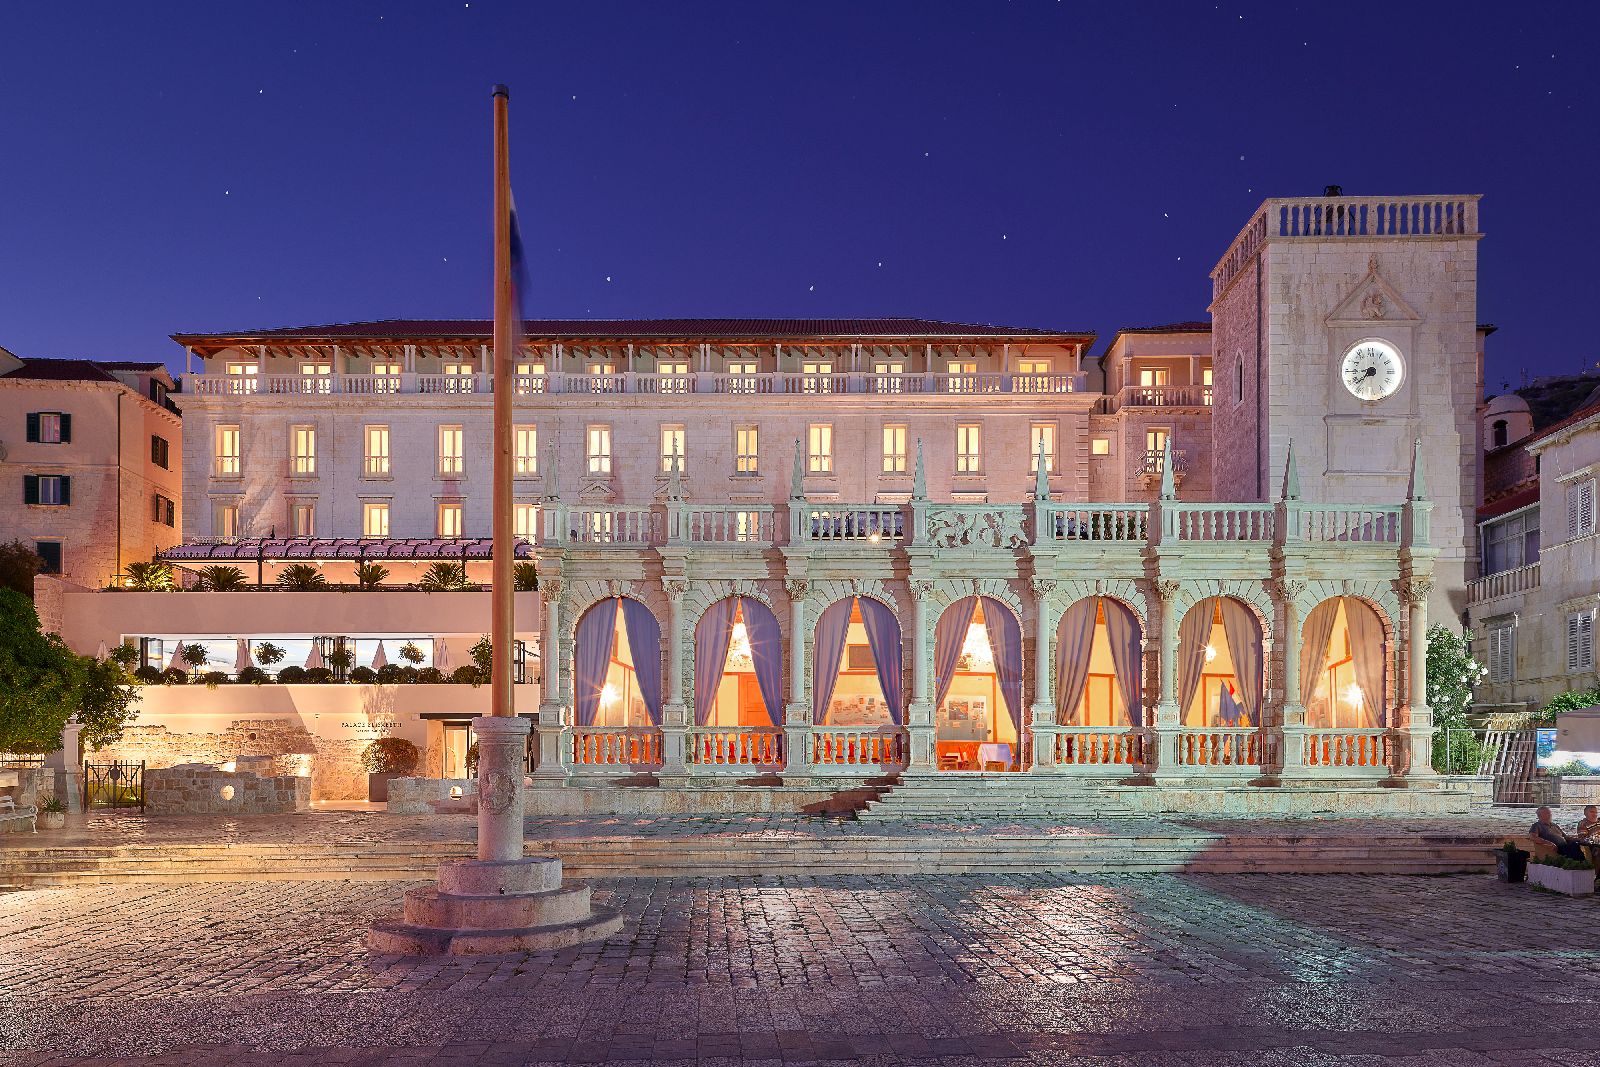 Exterior of the Palace Elisabeth hotel in Hvar in Croatia by night